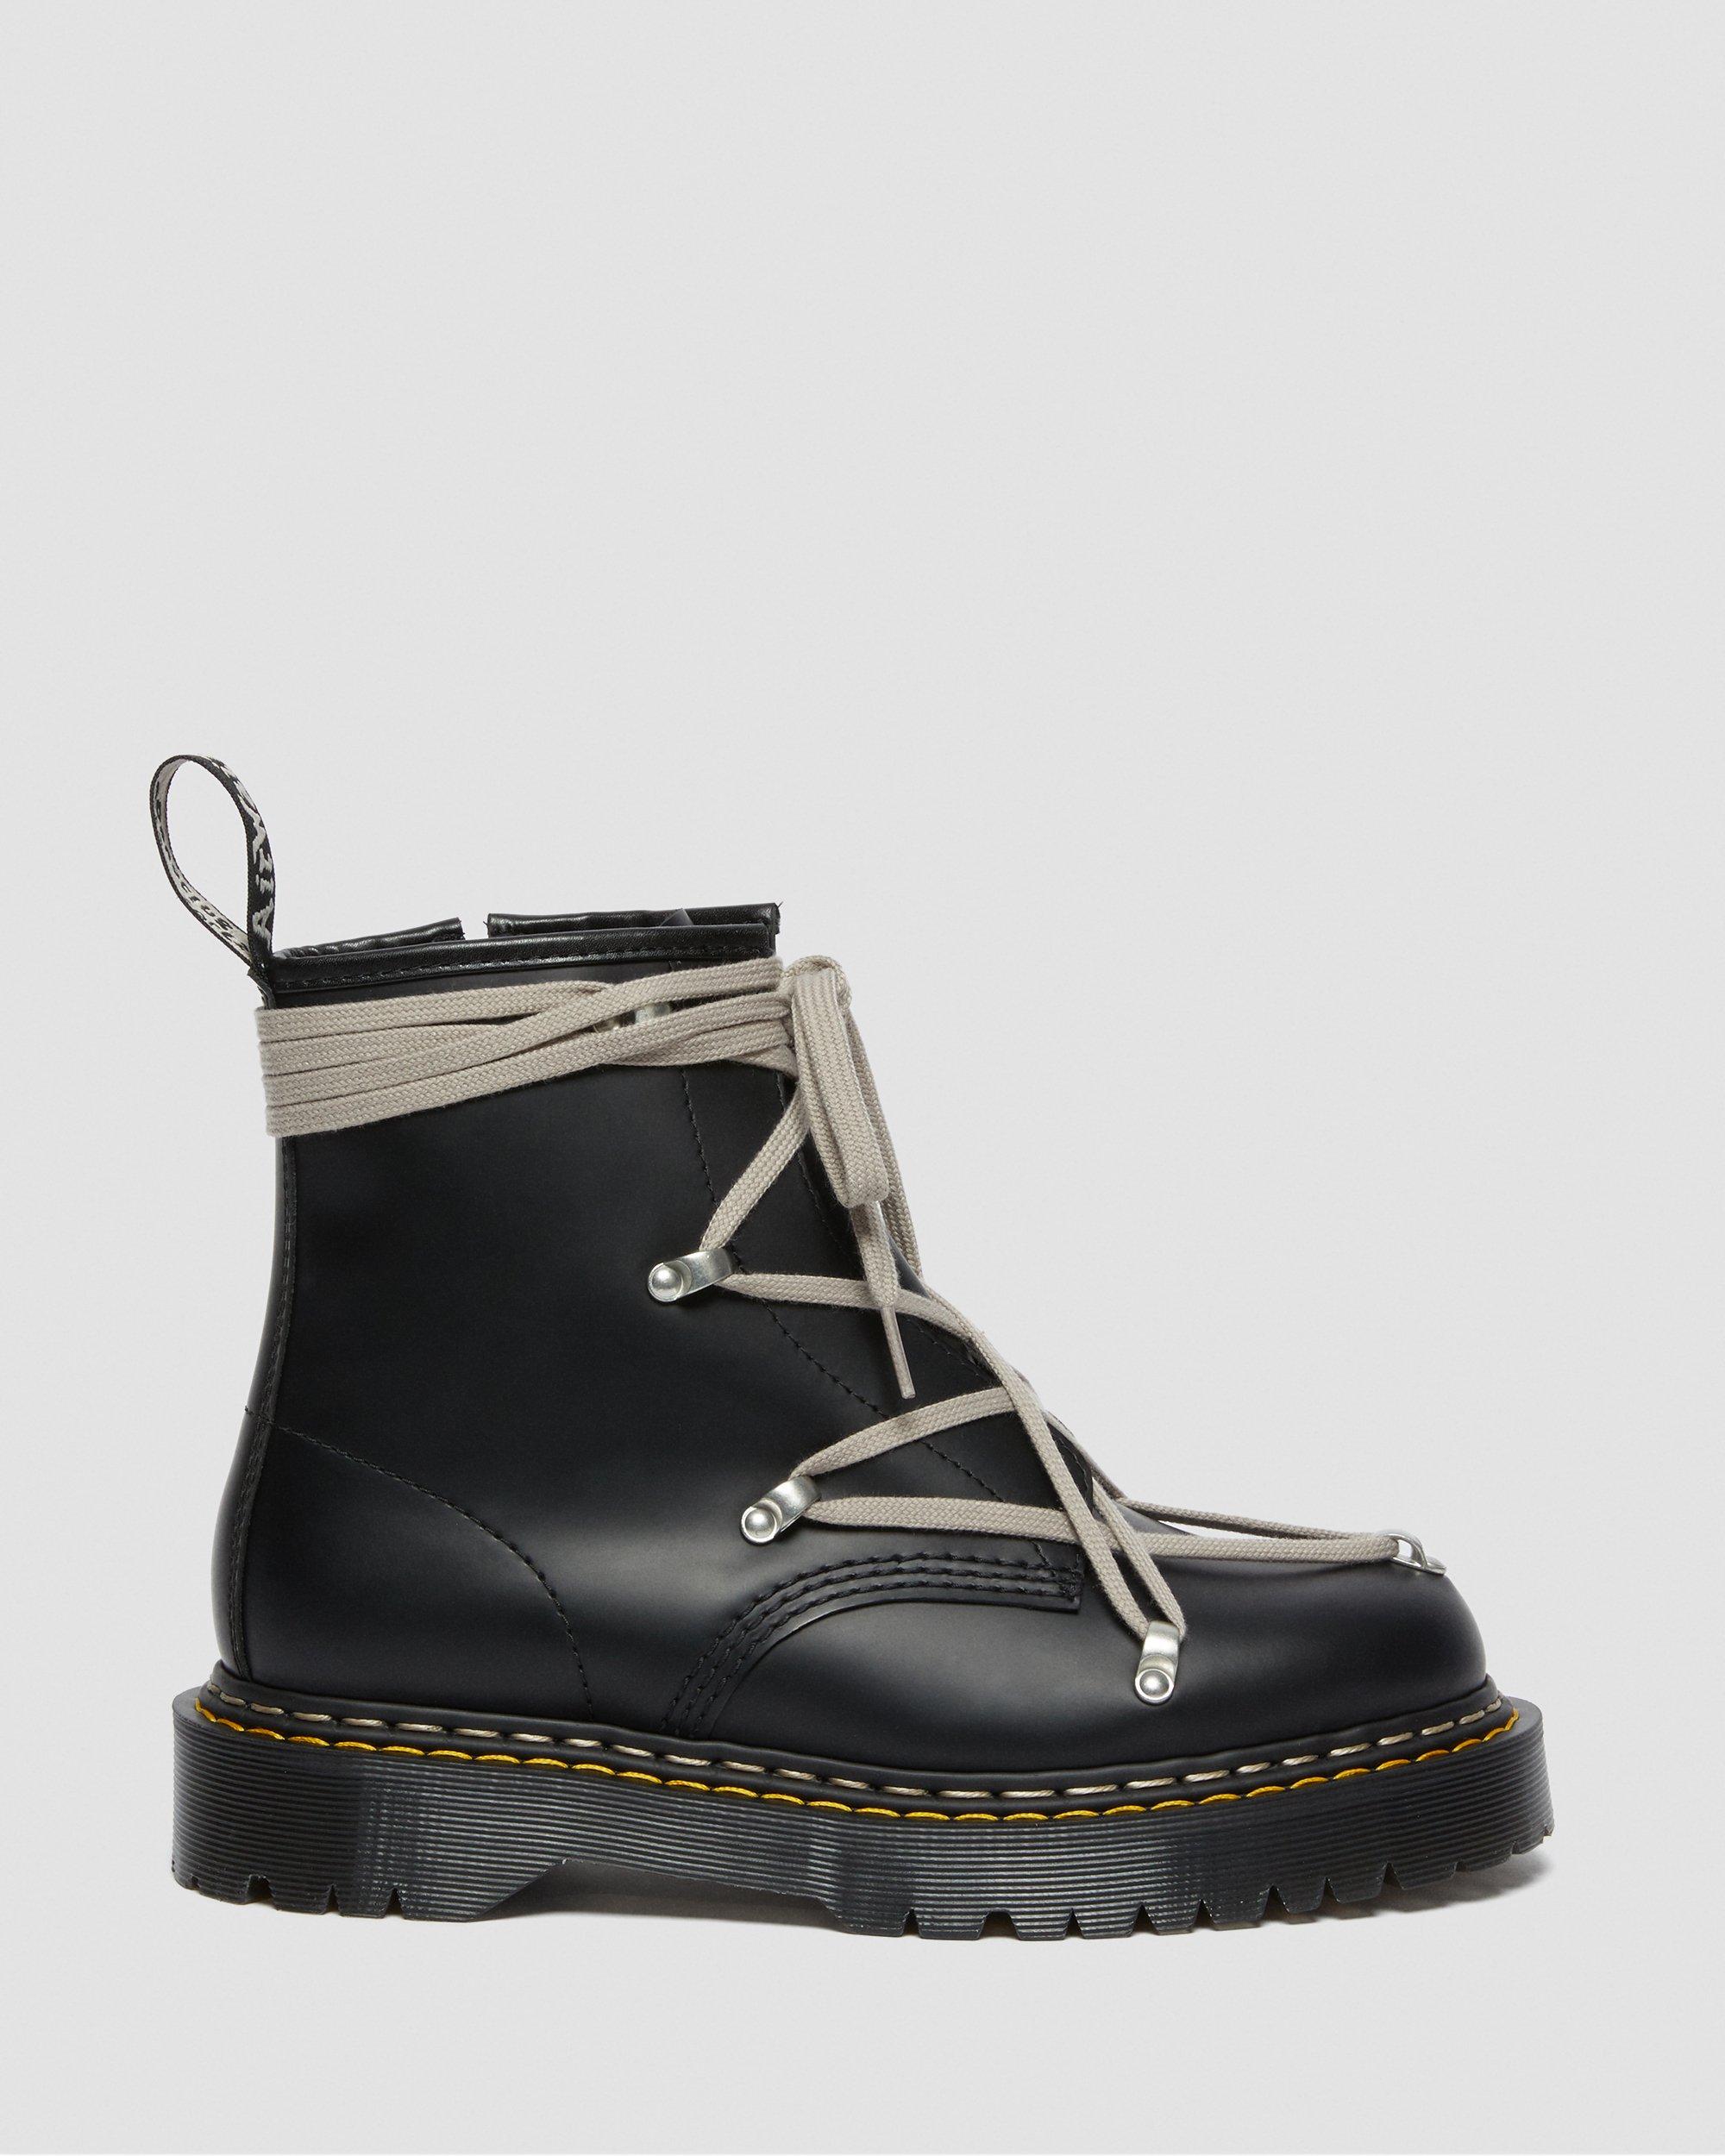 Rick Owens 1460 Bex Leather Lace Up Boots | Dr. Martens